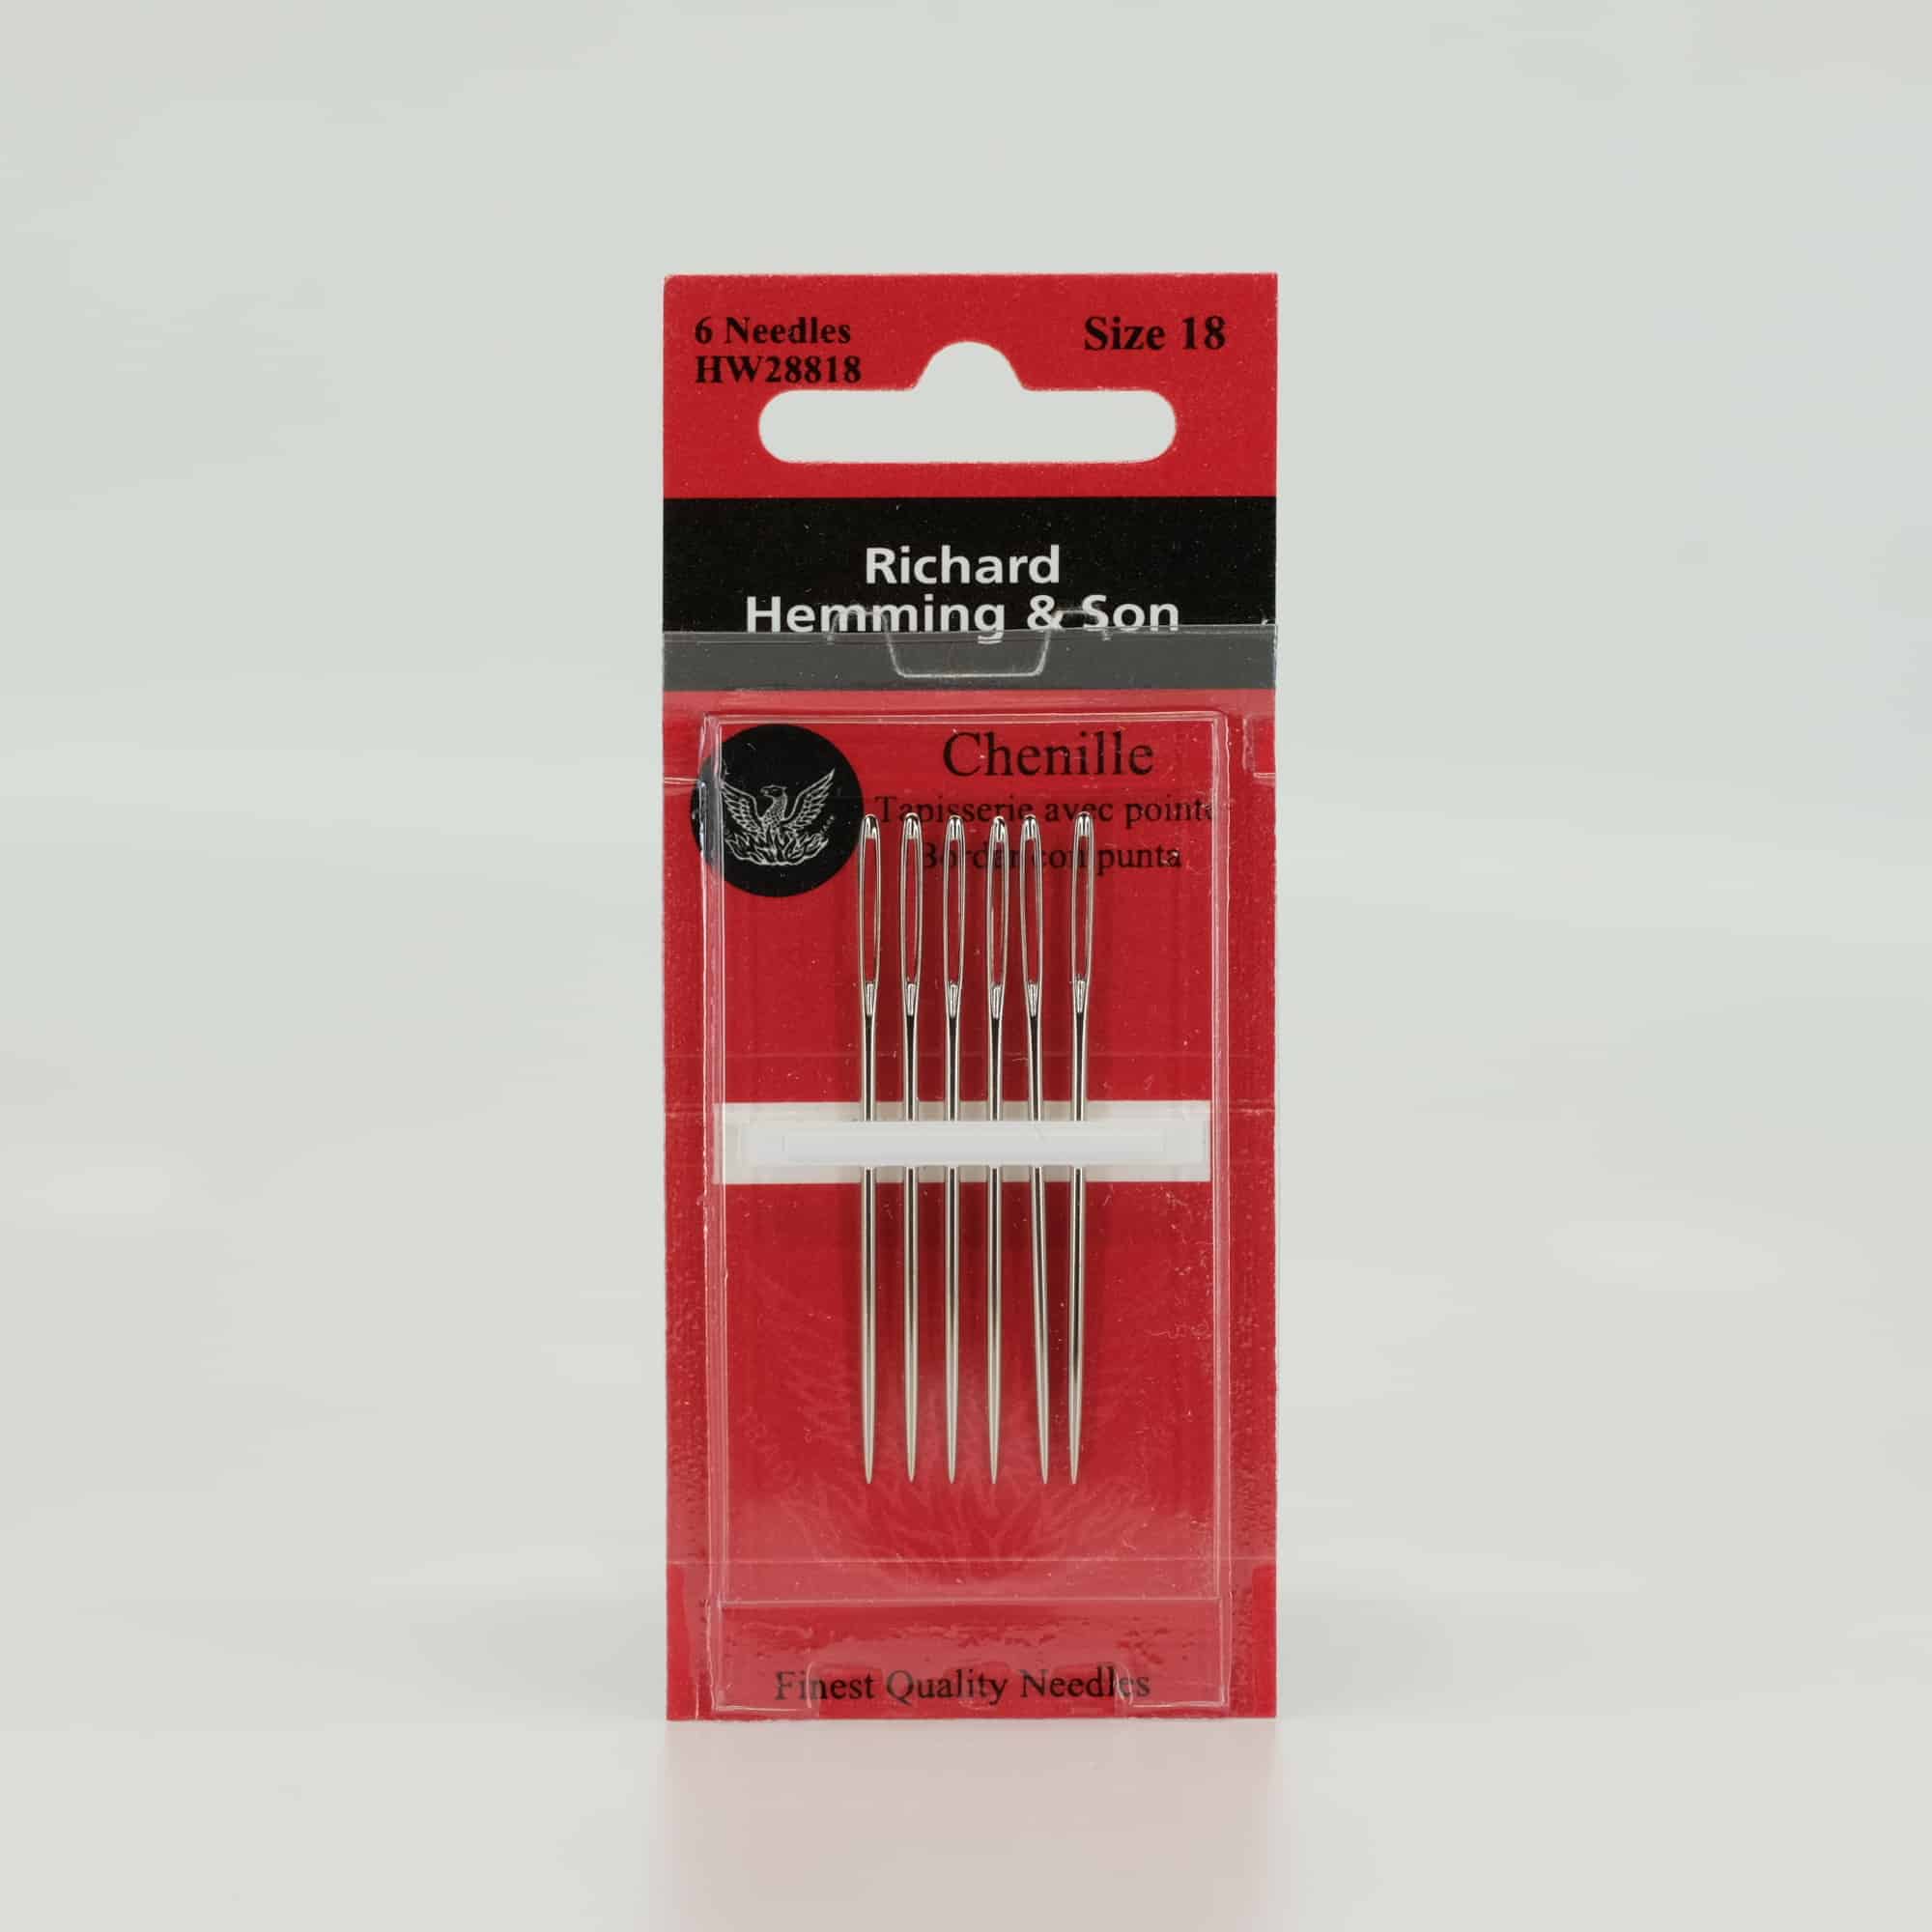 Chenille Hand Sewing Needles